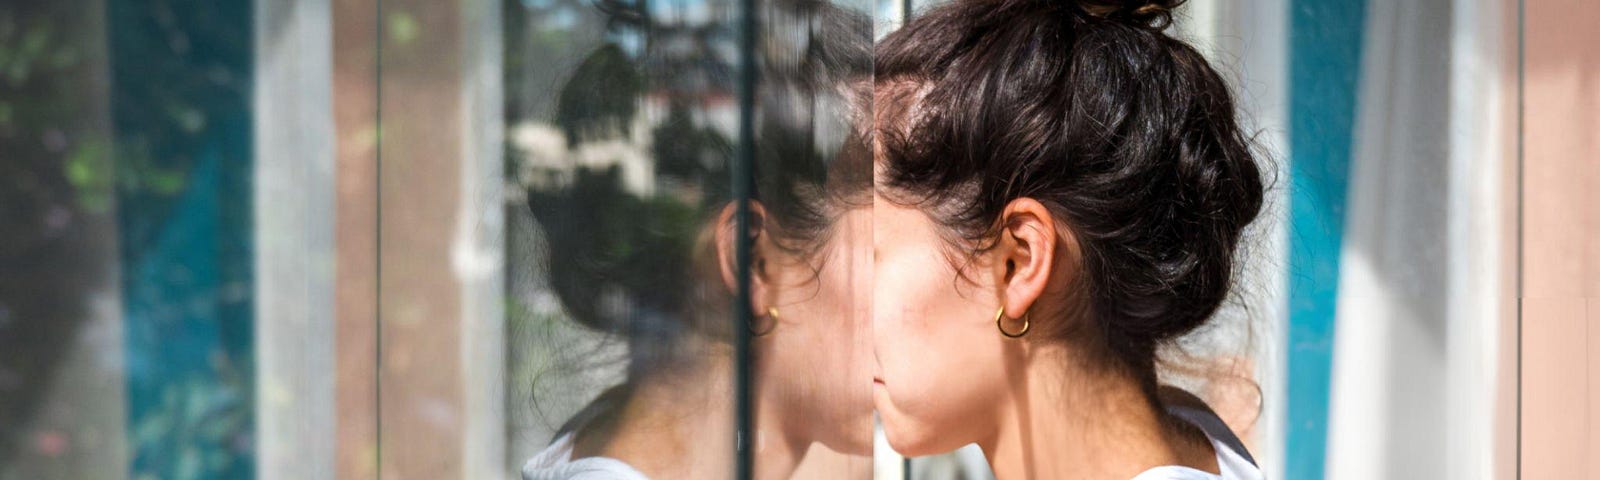 young woman looking out of window and reflecting in pane